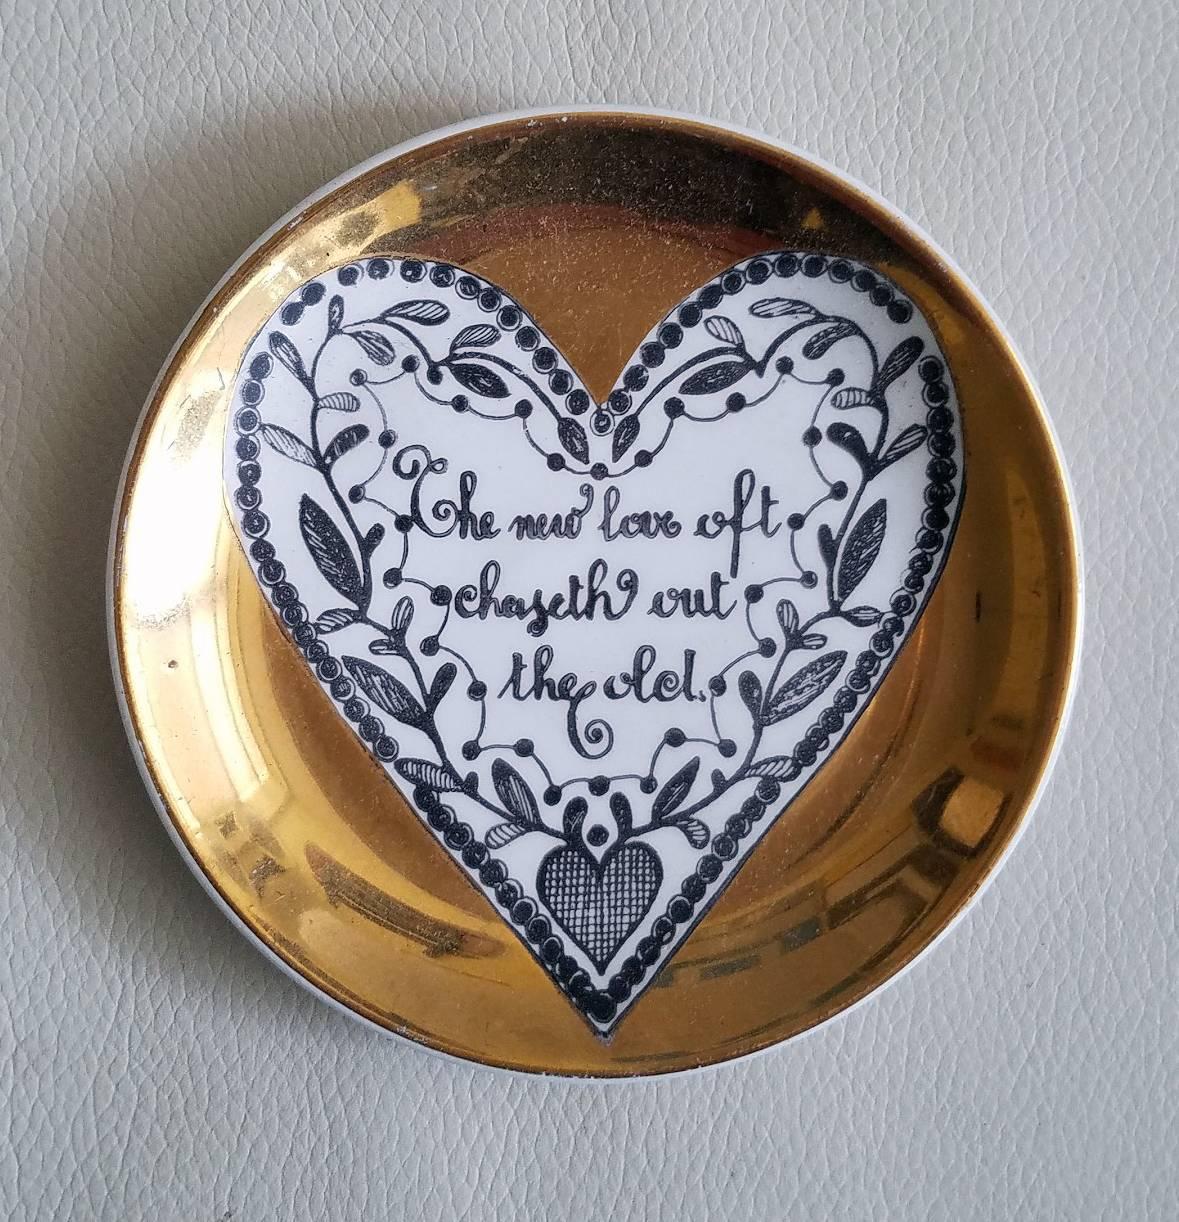 Piero Fornasetti Porcelain Coaster Set with Love, Hearts and Saying 1